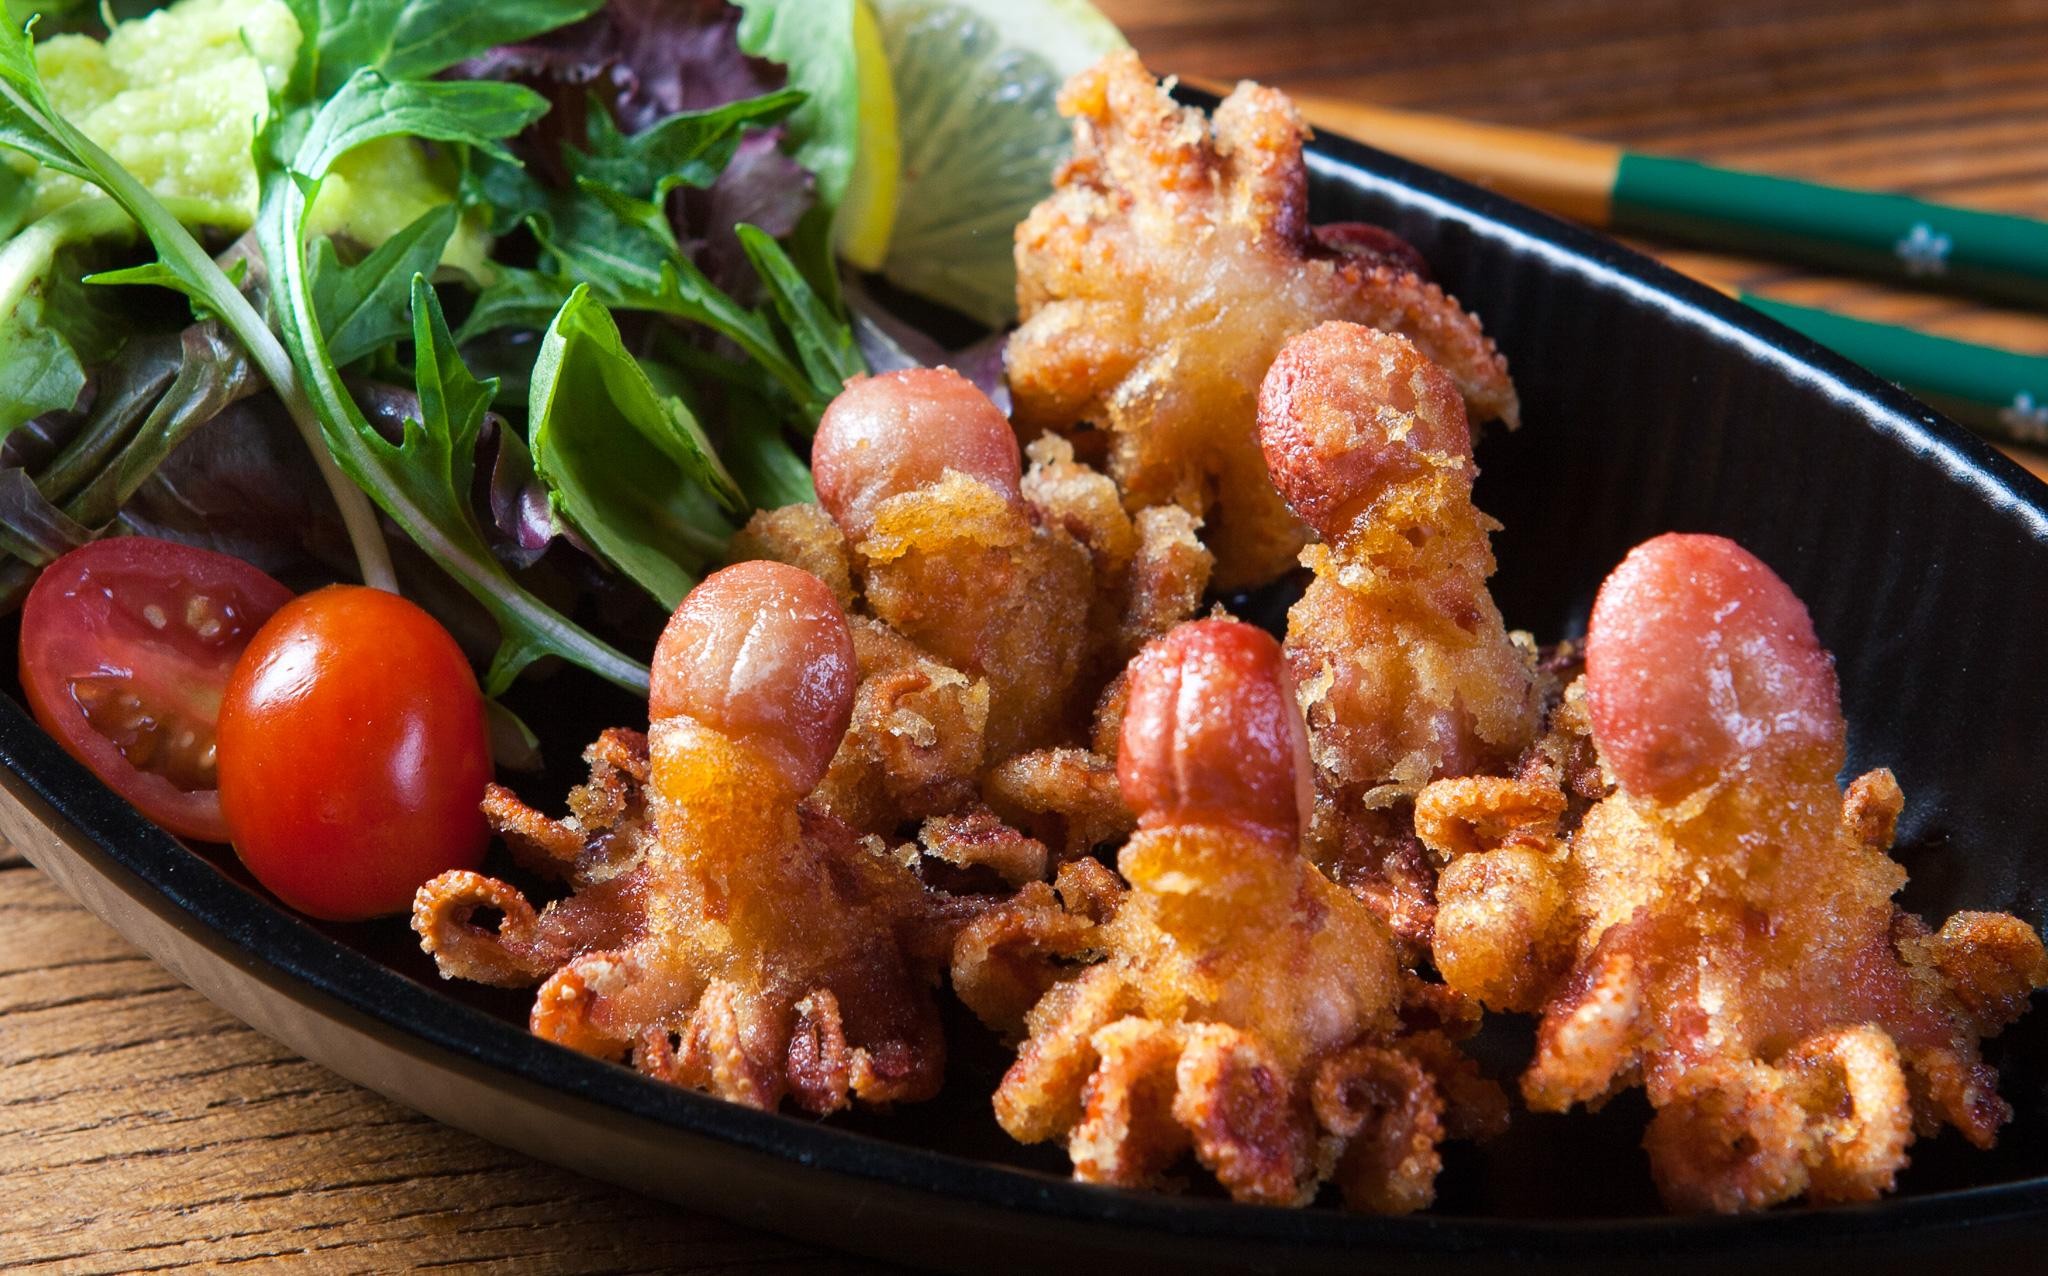 FRIED BABY OCTOPUS